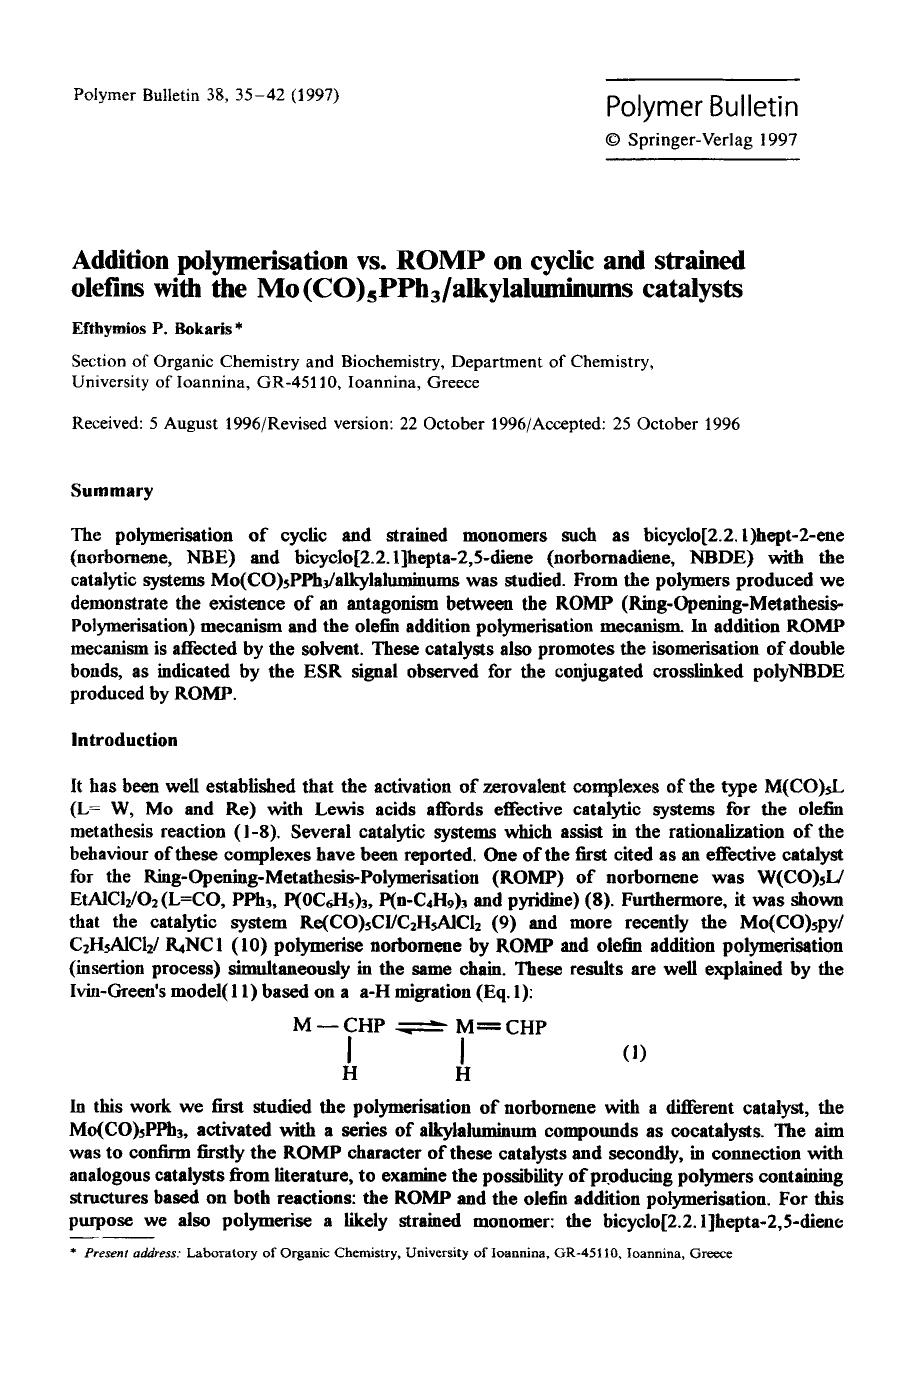 Addition polymerisation vs. ROMP on cyclic and strained olefins with the Mo(CO) <Subscript>5 <Subscript>PPh <Subscript>3 <Subscript>alkylaluminums catalysts by Unknown